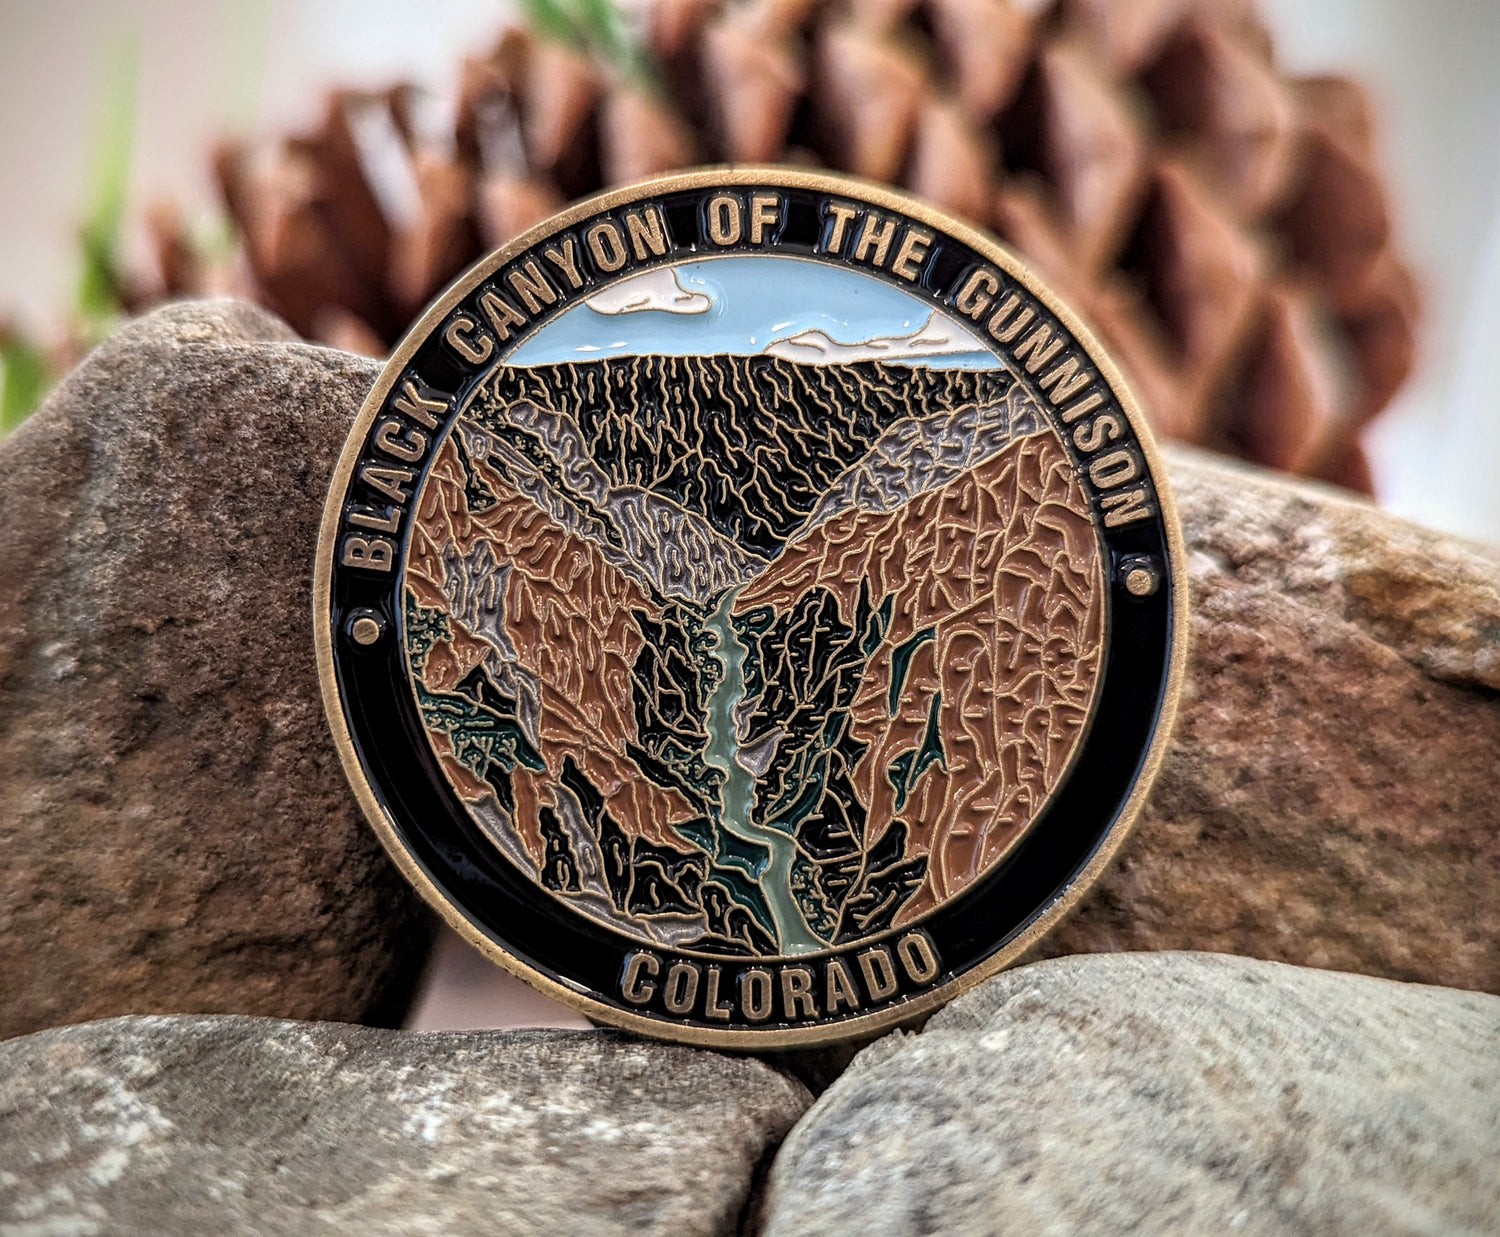 BLACK CANYON OF THE GUNNISON NATIONAL PARK CHALLENGE COIN